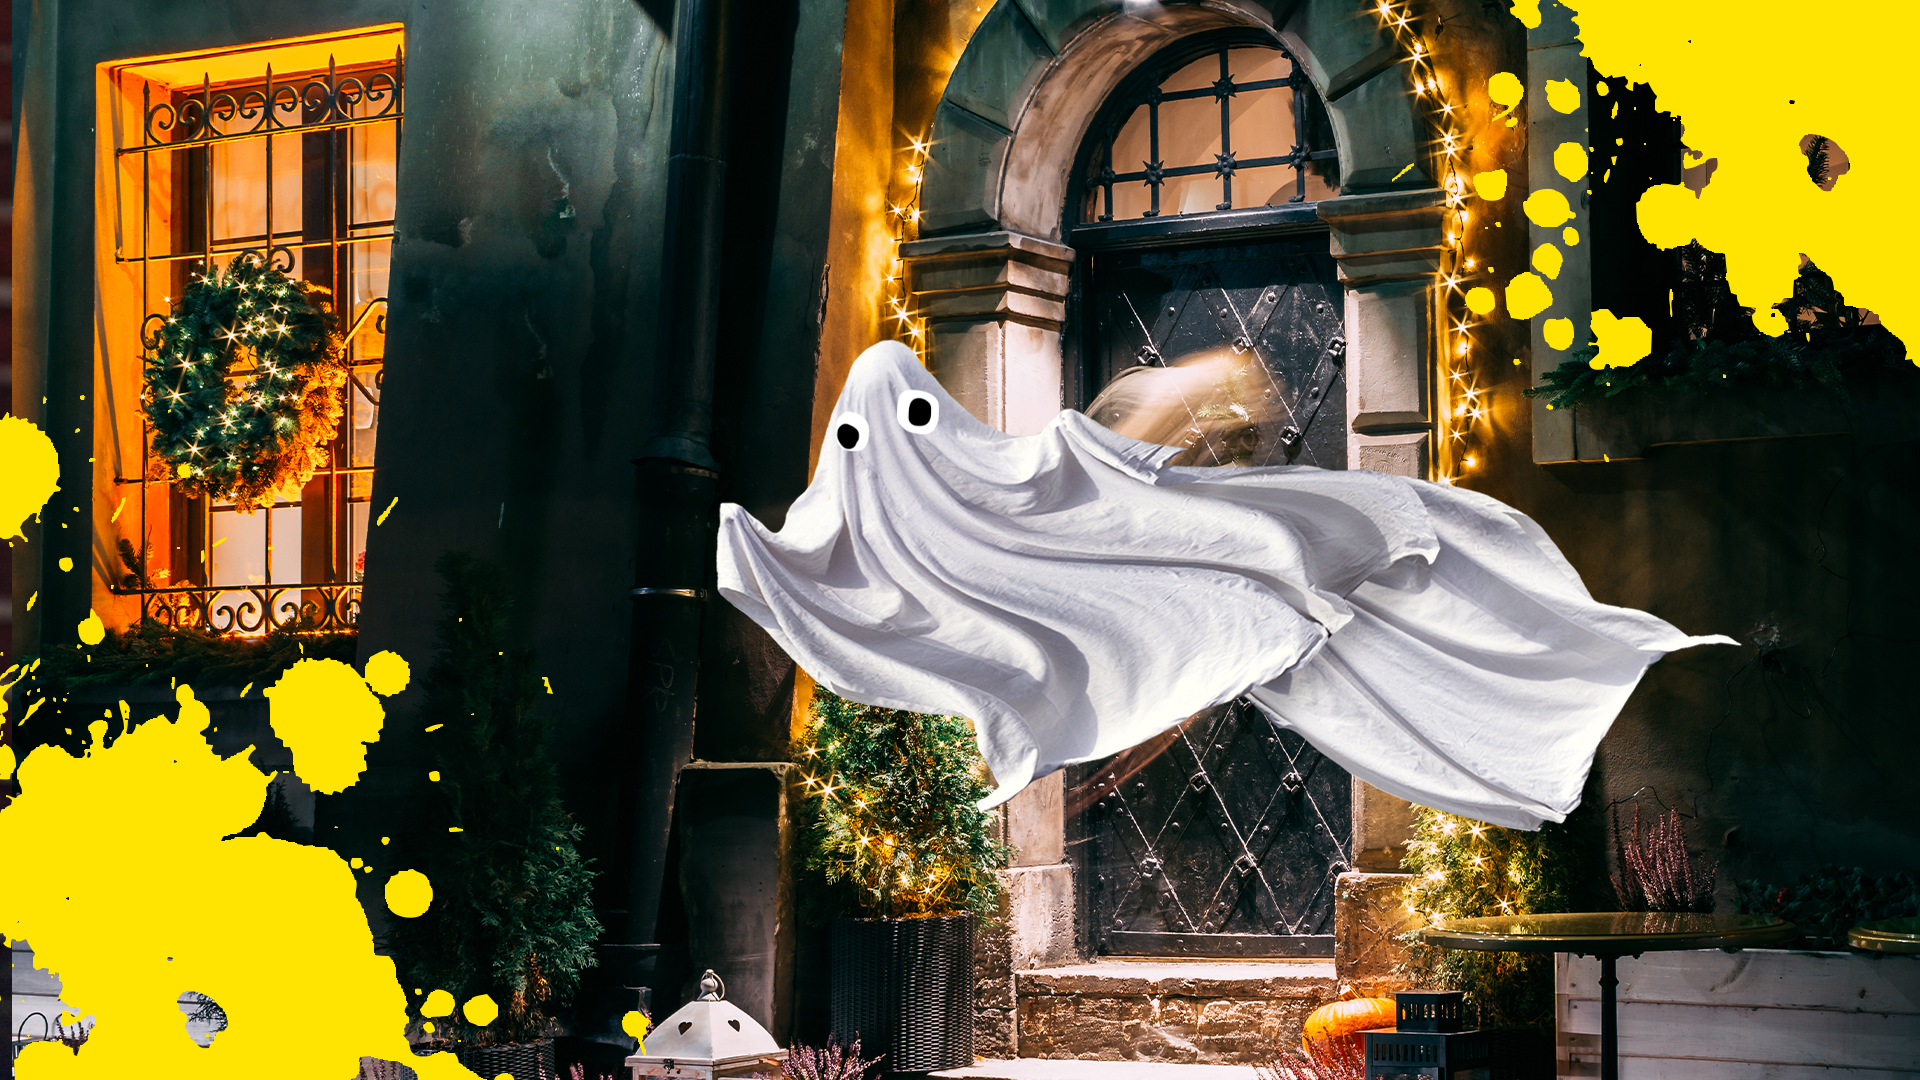 A spooky ghost in a Christmas scene with splats